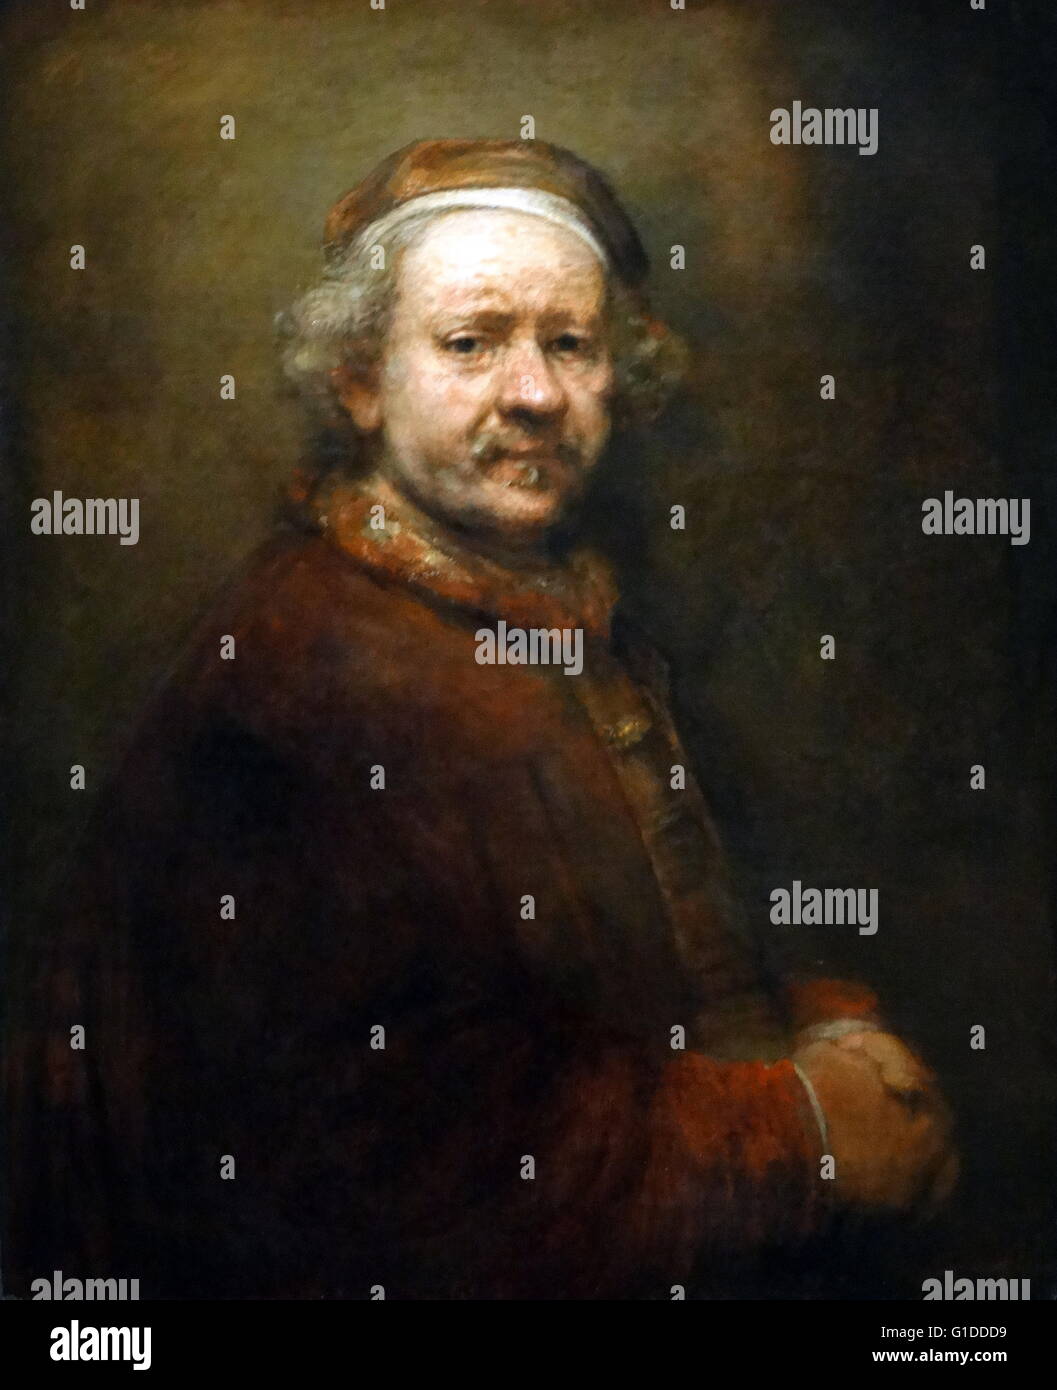 Painting titled 'Self Portrait at Age of 63' by Rembrandt Harmenszoon van Rijn (1606-1669) a Dutch painter and etcher. Dated 17th Century Stock Photo